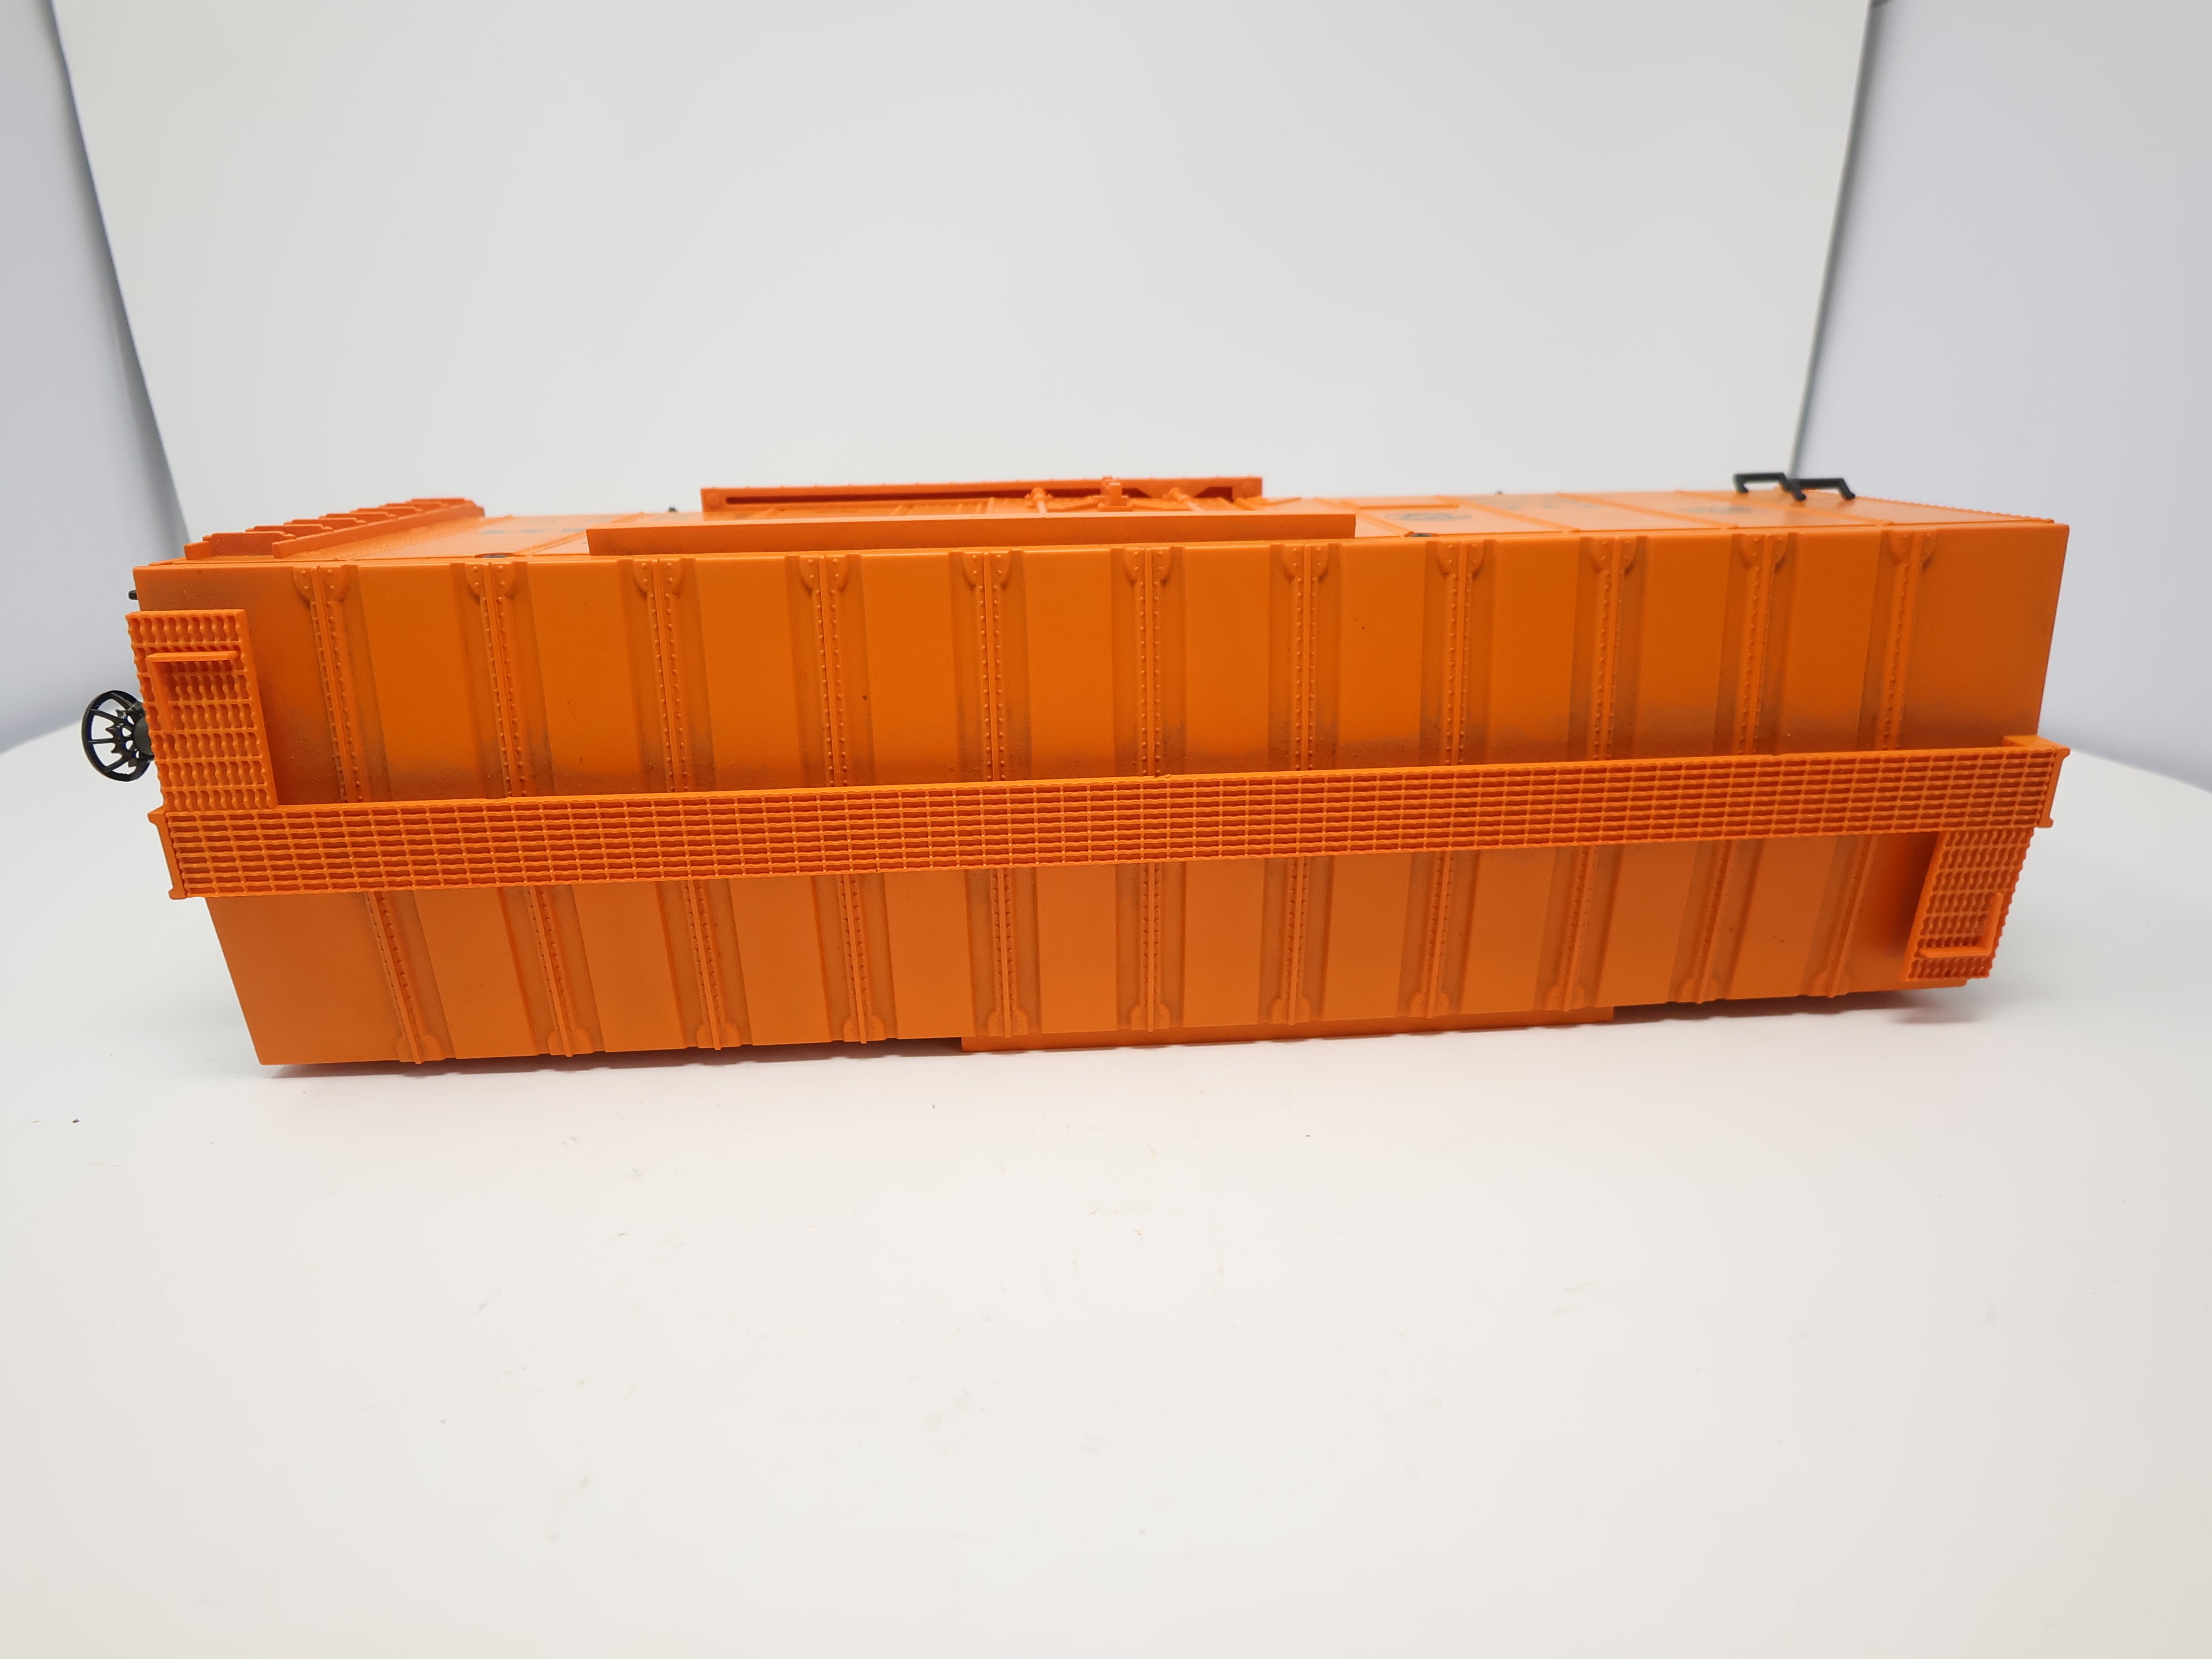 USED Lionel 8-87100 G Scale, Reefer Box Car, Pacific Fruit Express PFE #87100